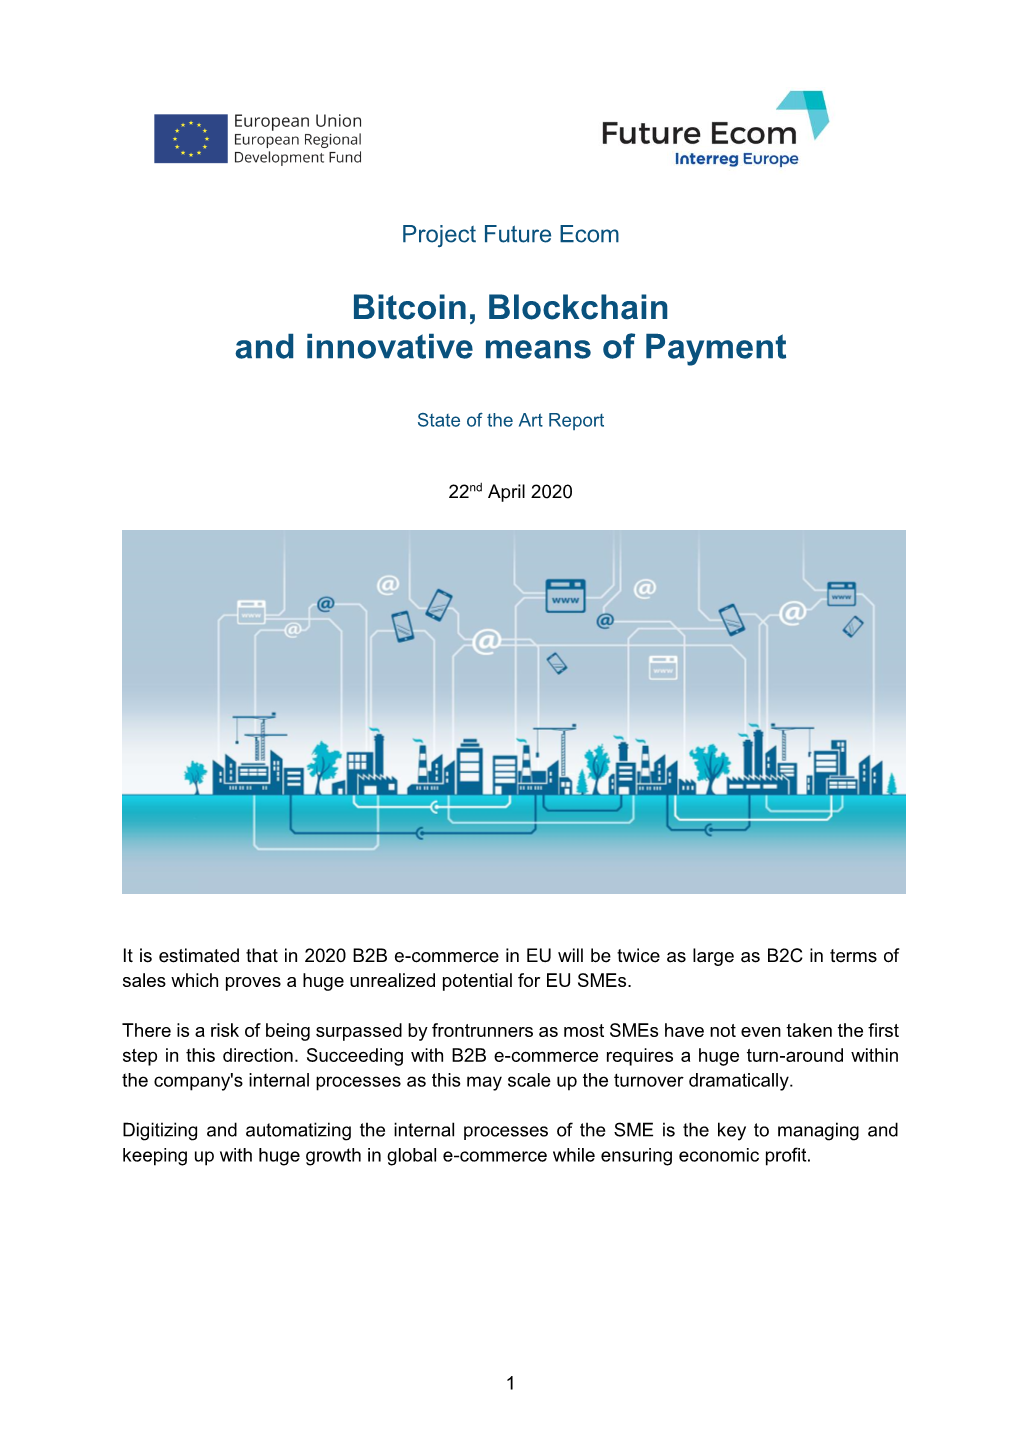 Bitcoin, Blockchain and Innovative Means of Payment